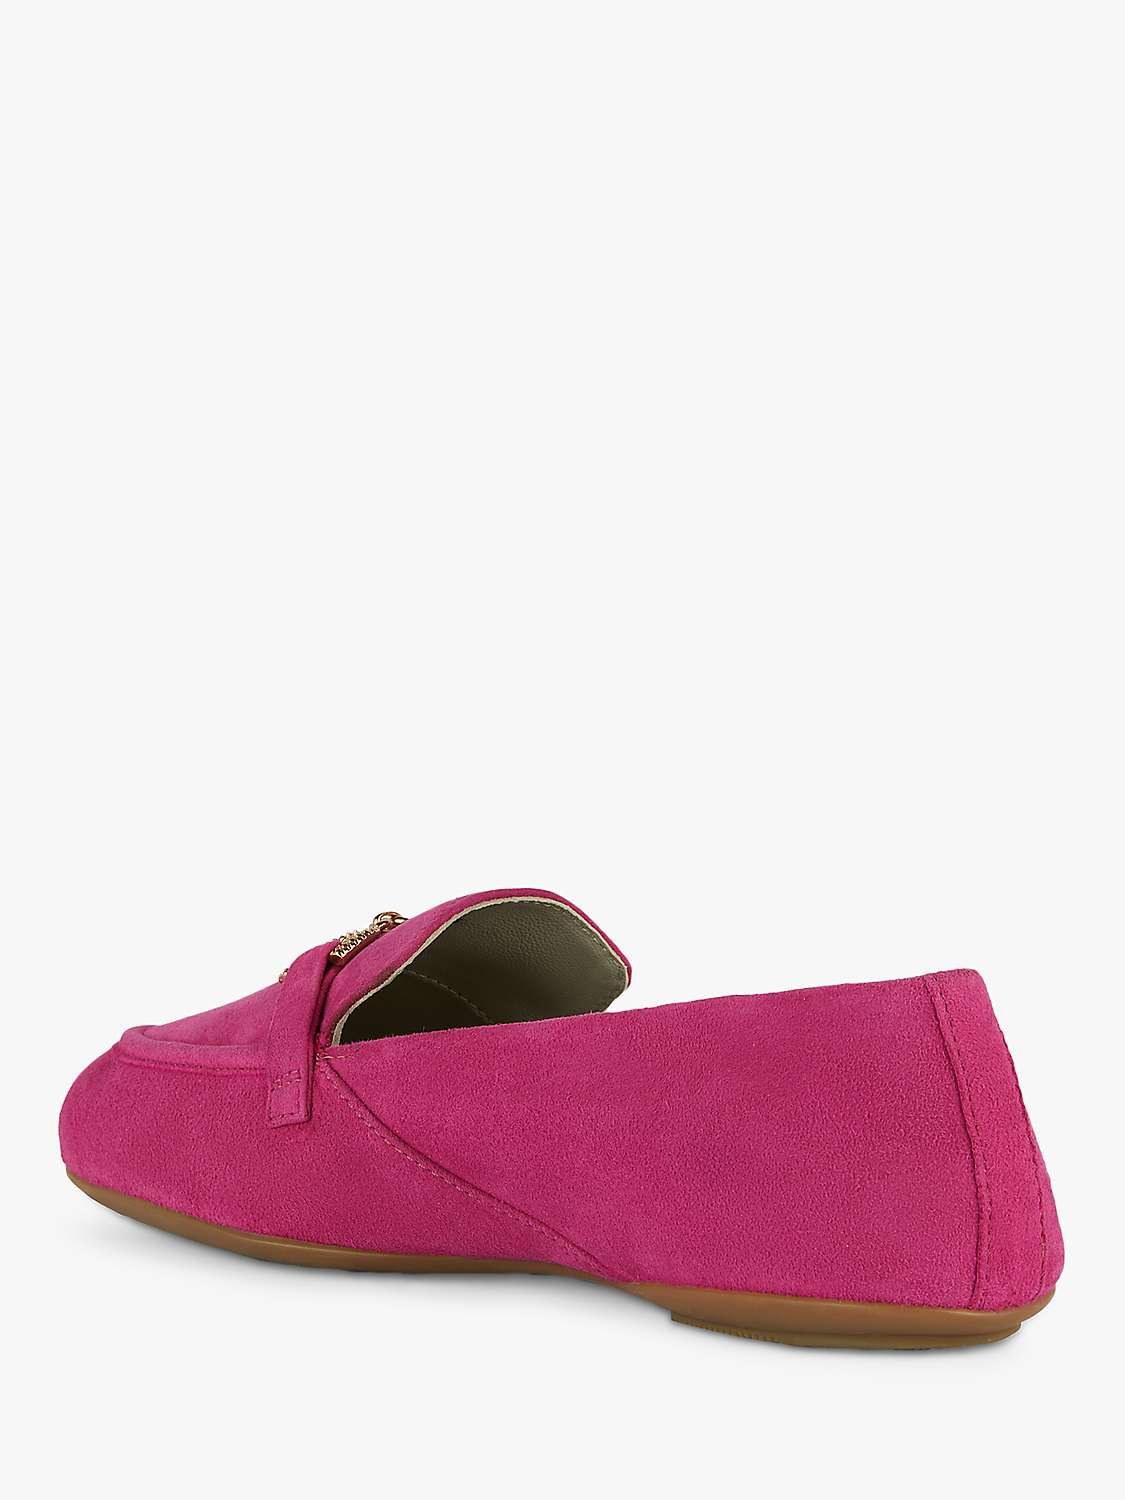 Buy Geox Palmaria Suede City Loafers Online at johnlewis.com